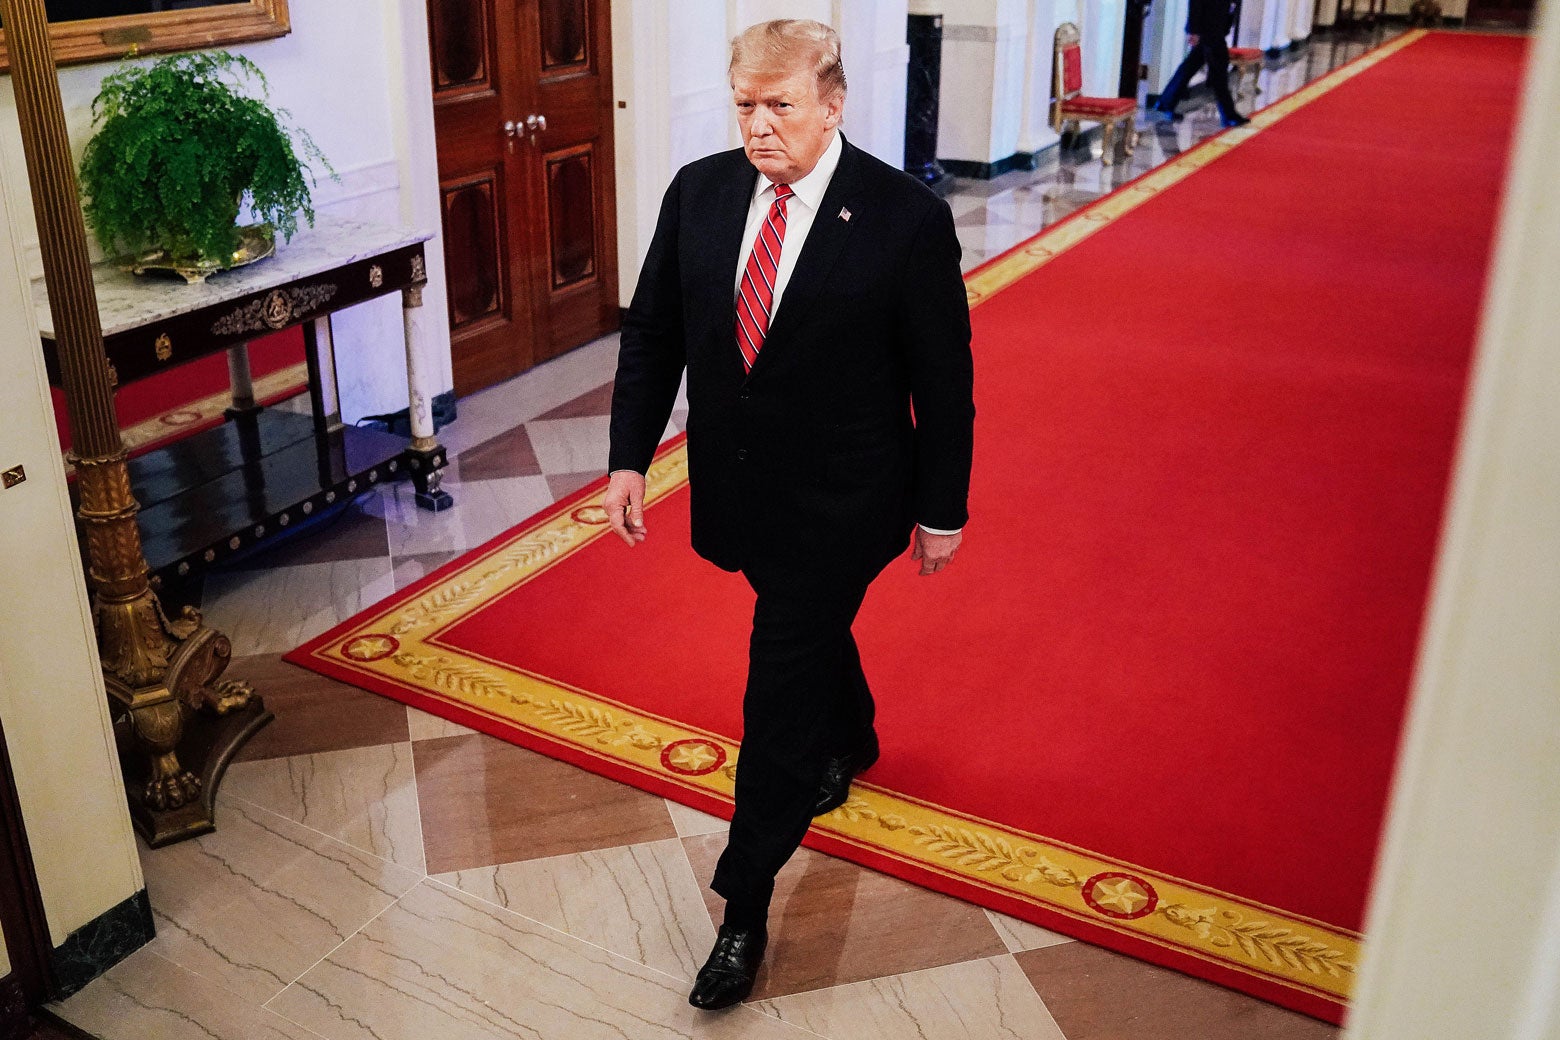 U.S. President Donald Trump arrives for a First Step Act celebration at the White House on Monday.